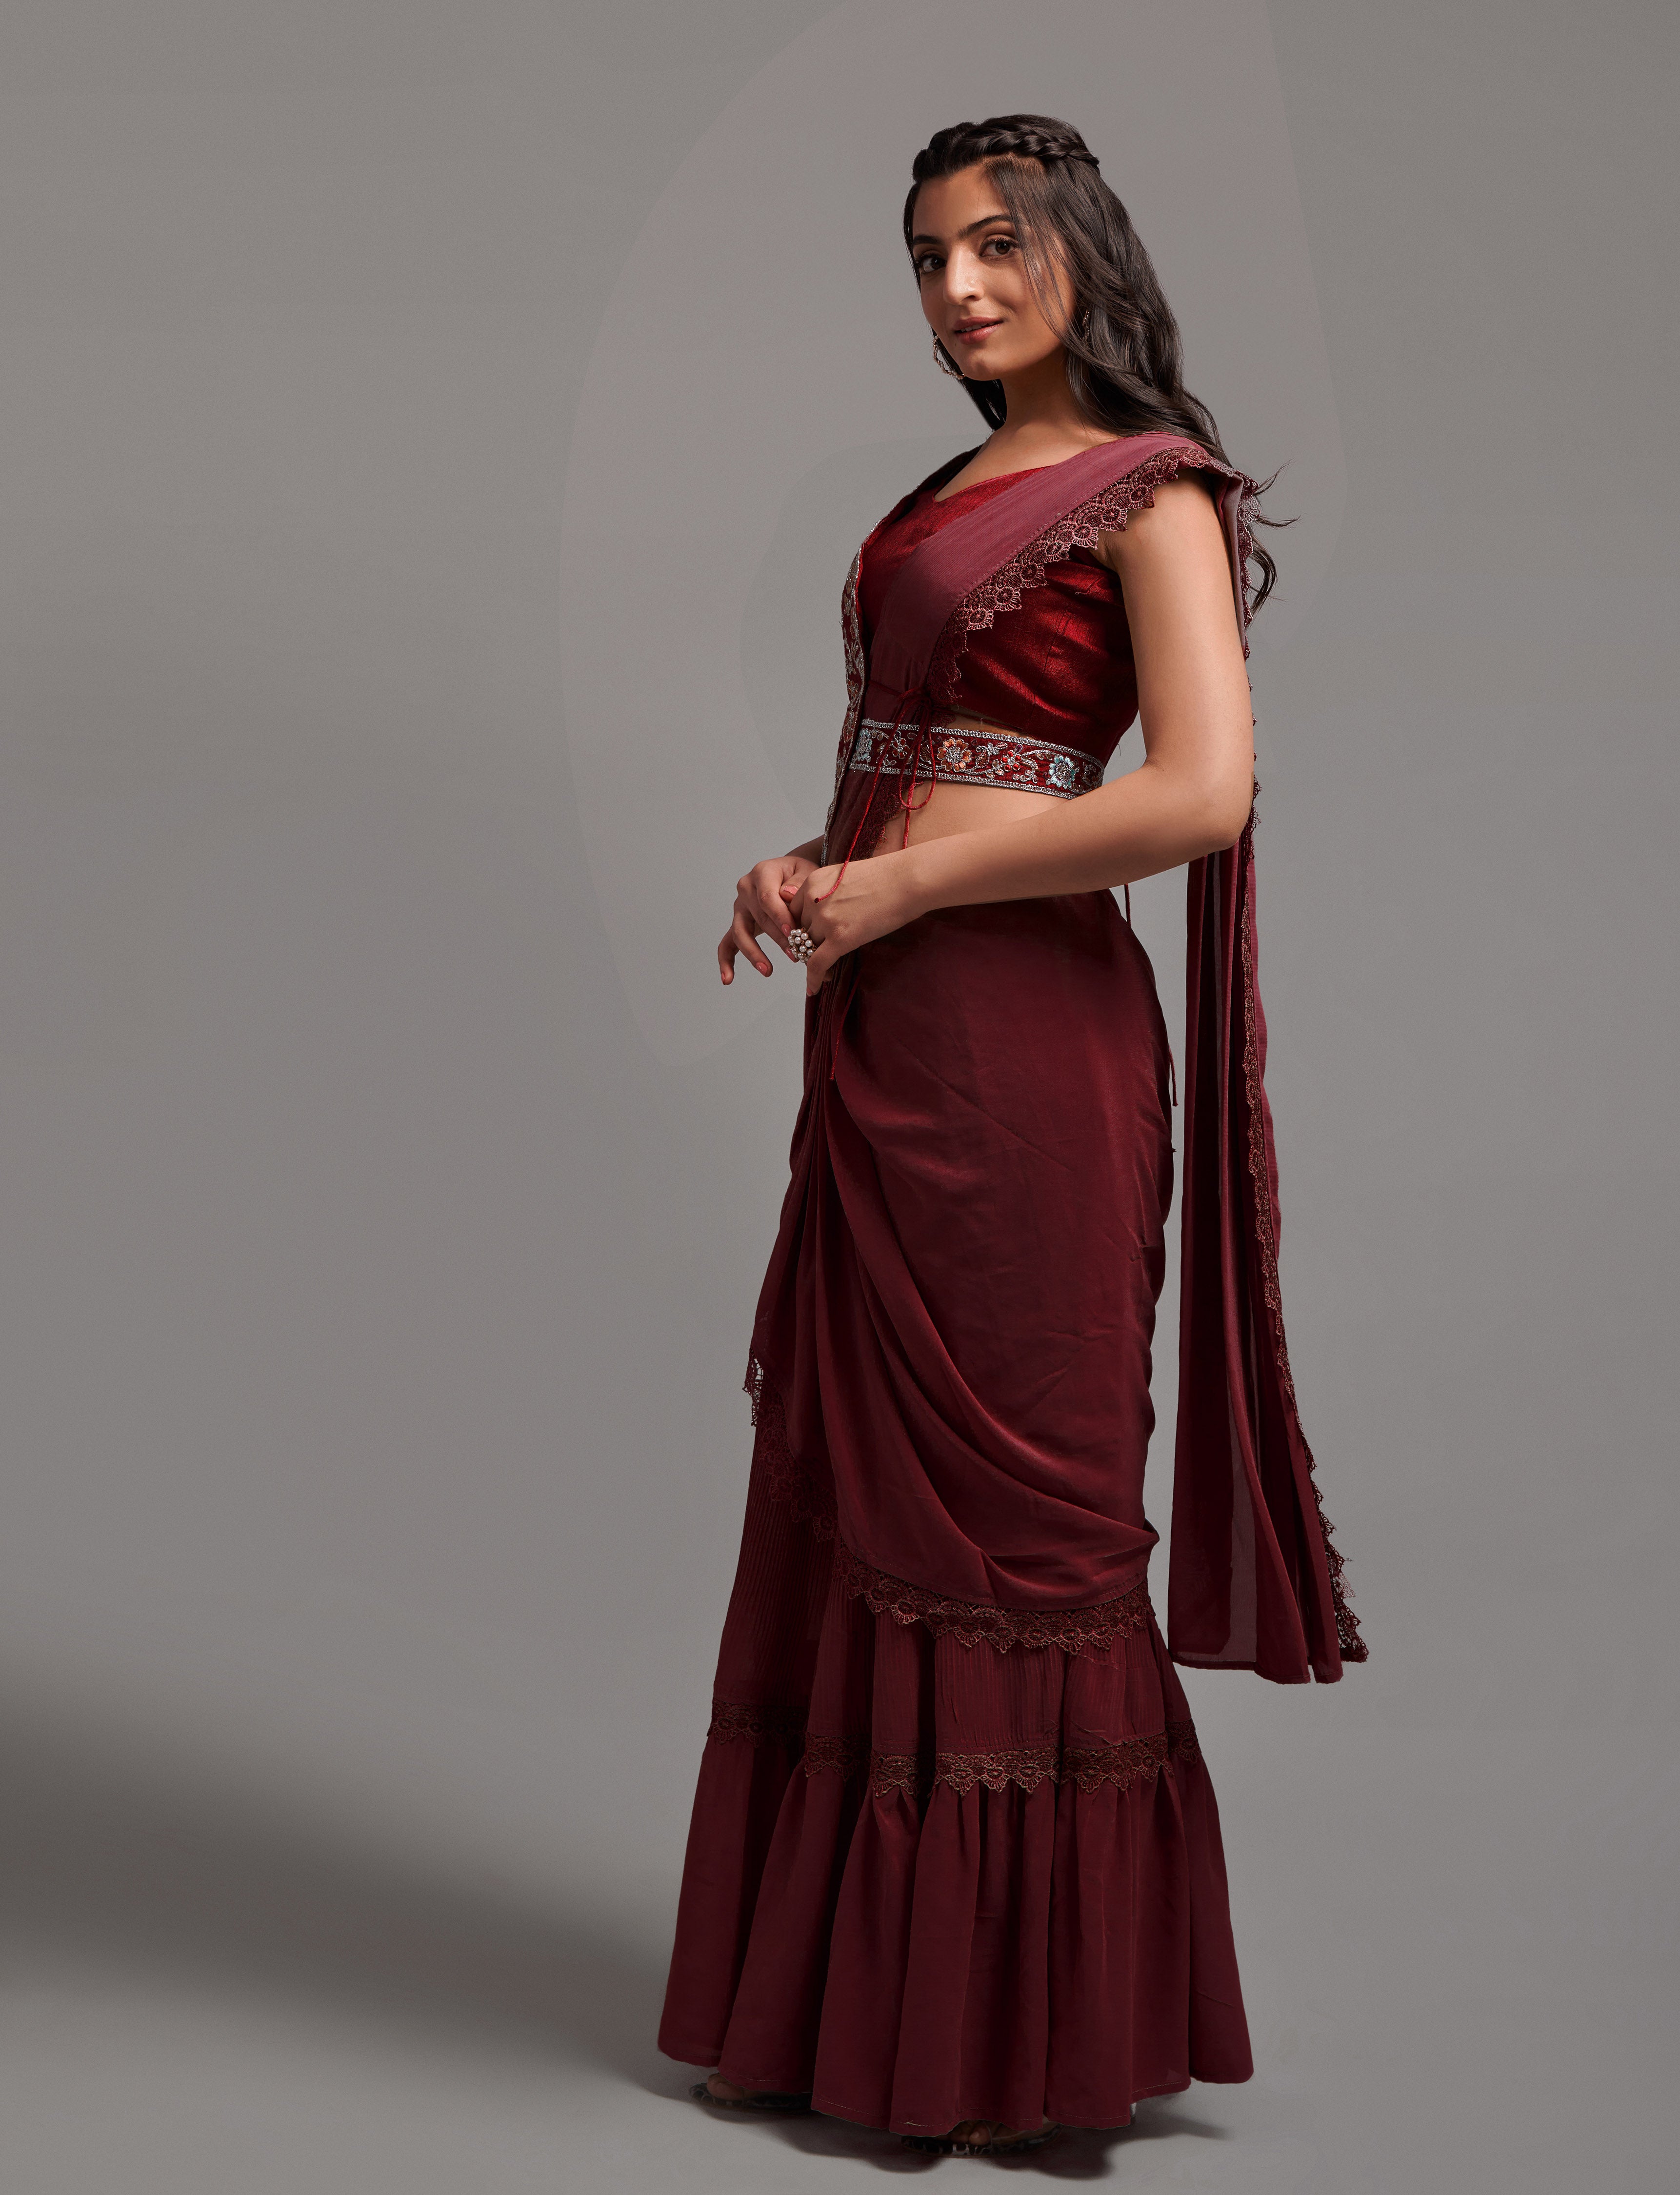 Women Wedding Wear Ready to Wear Goergette Saree with Stitched Blouse(Free Size-Up to 42)